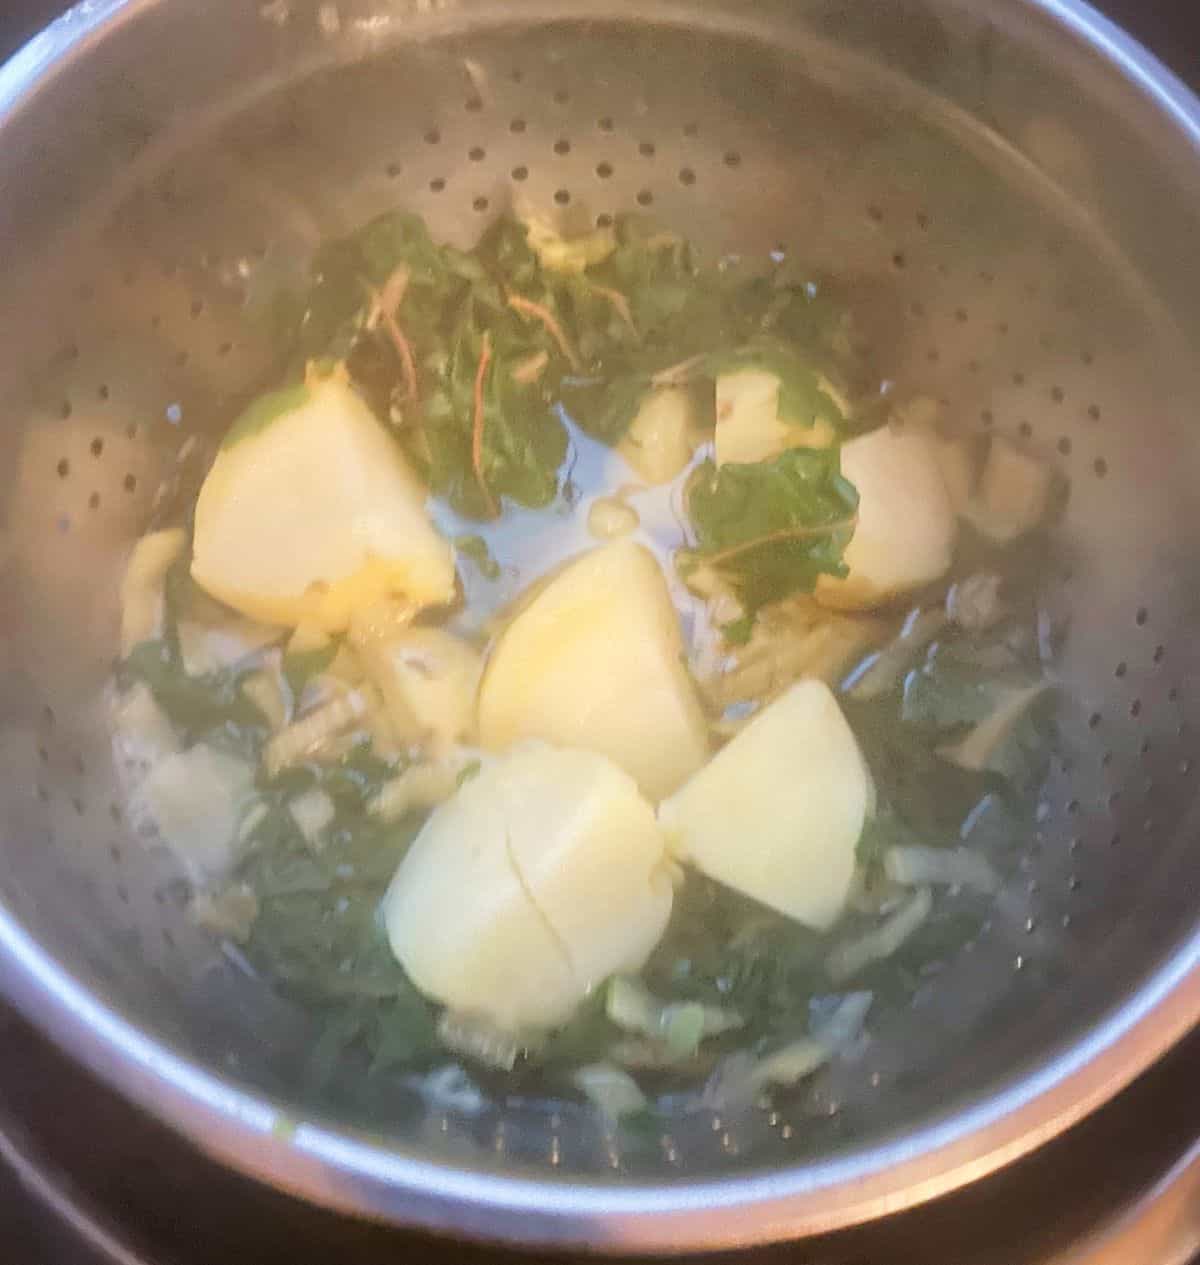 cooked potatoes and chard draining in a colander.